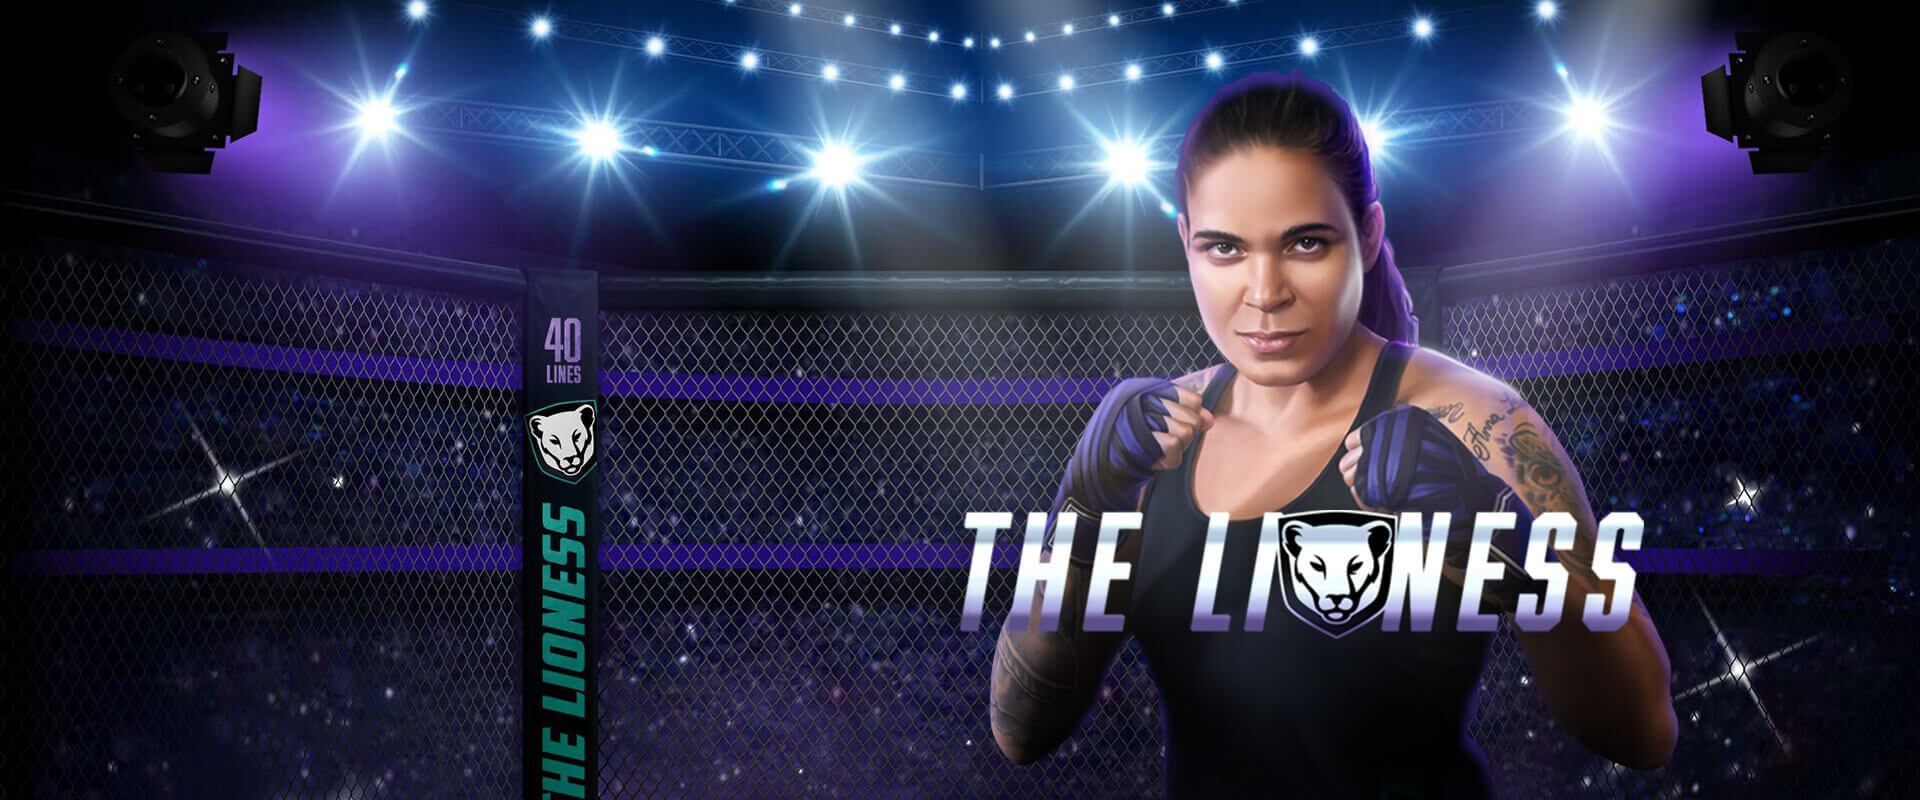 The Lioness with Amanda Nunes Screenshot <br />
<b>Notice</b>:  Undefined variable: key in <b>/var/www/html/wp-content/themes/armadillo/page-game.php</b> on line <b>37</b><br />
1